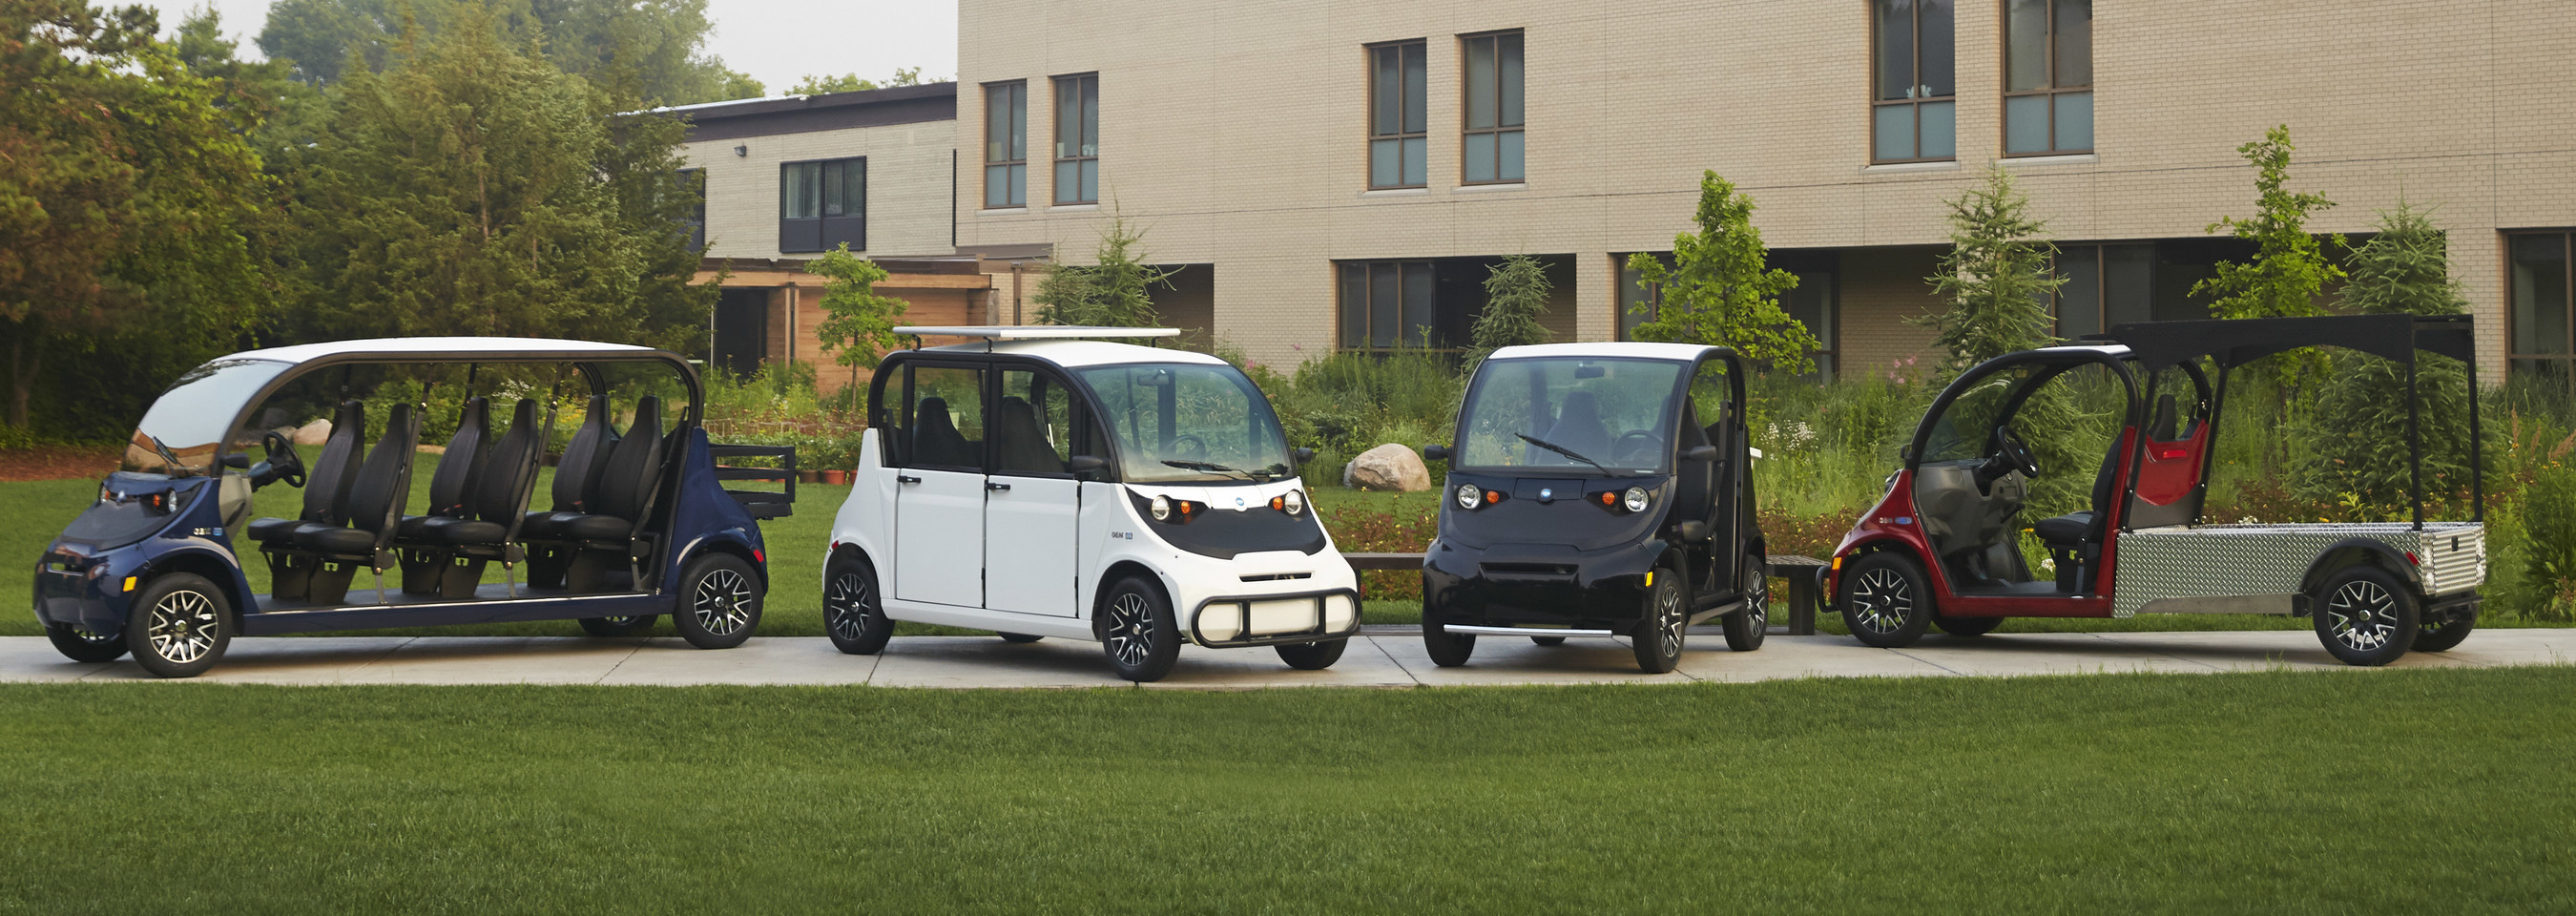 The new Polaris GEM electric vehicles are engineered for comfort, built with more safety features and offer Smart Power options.